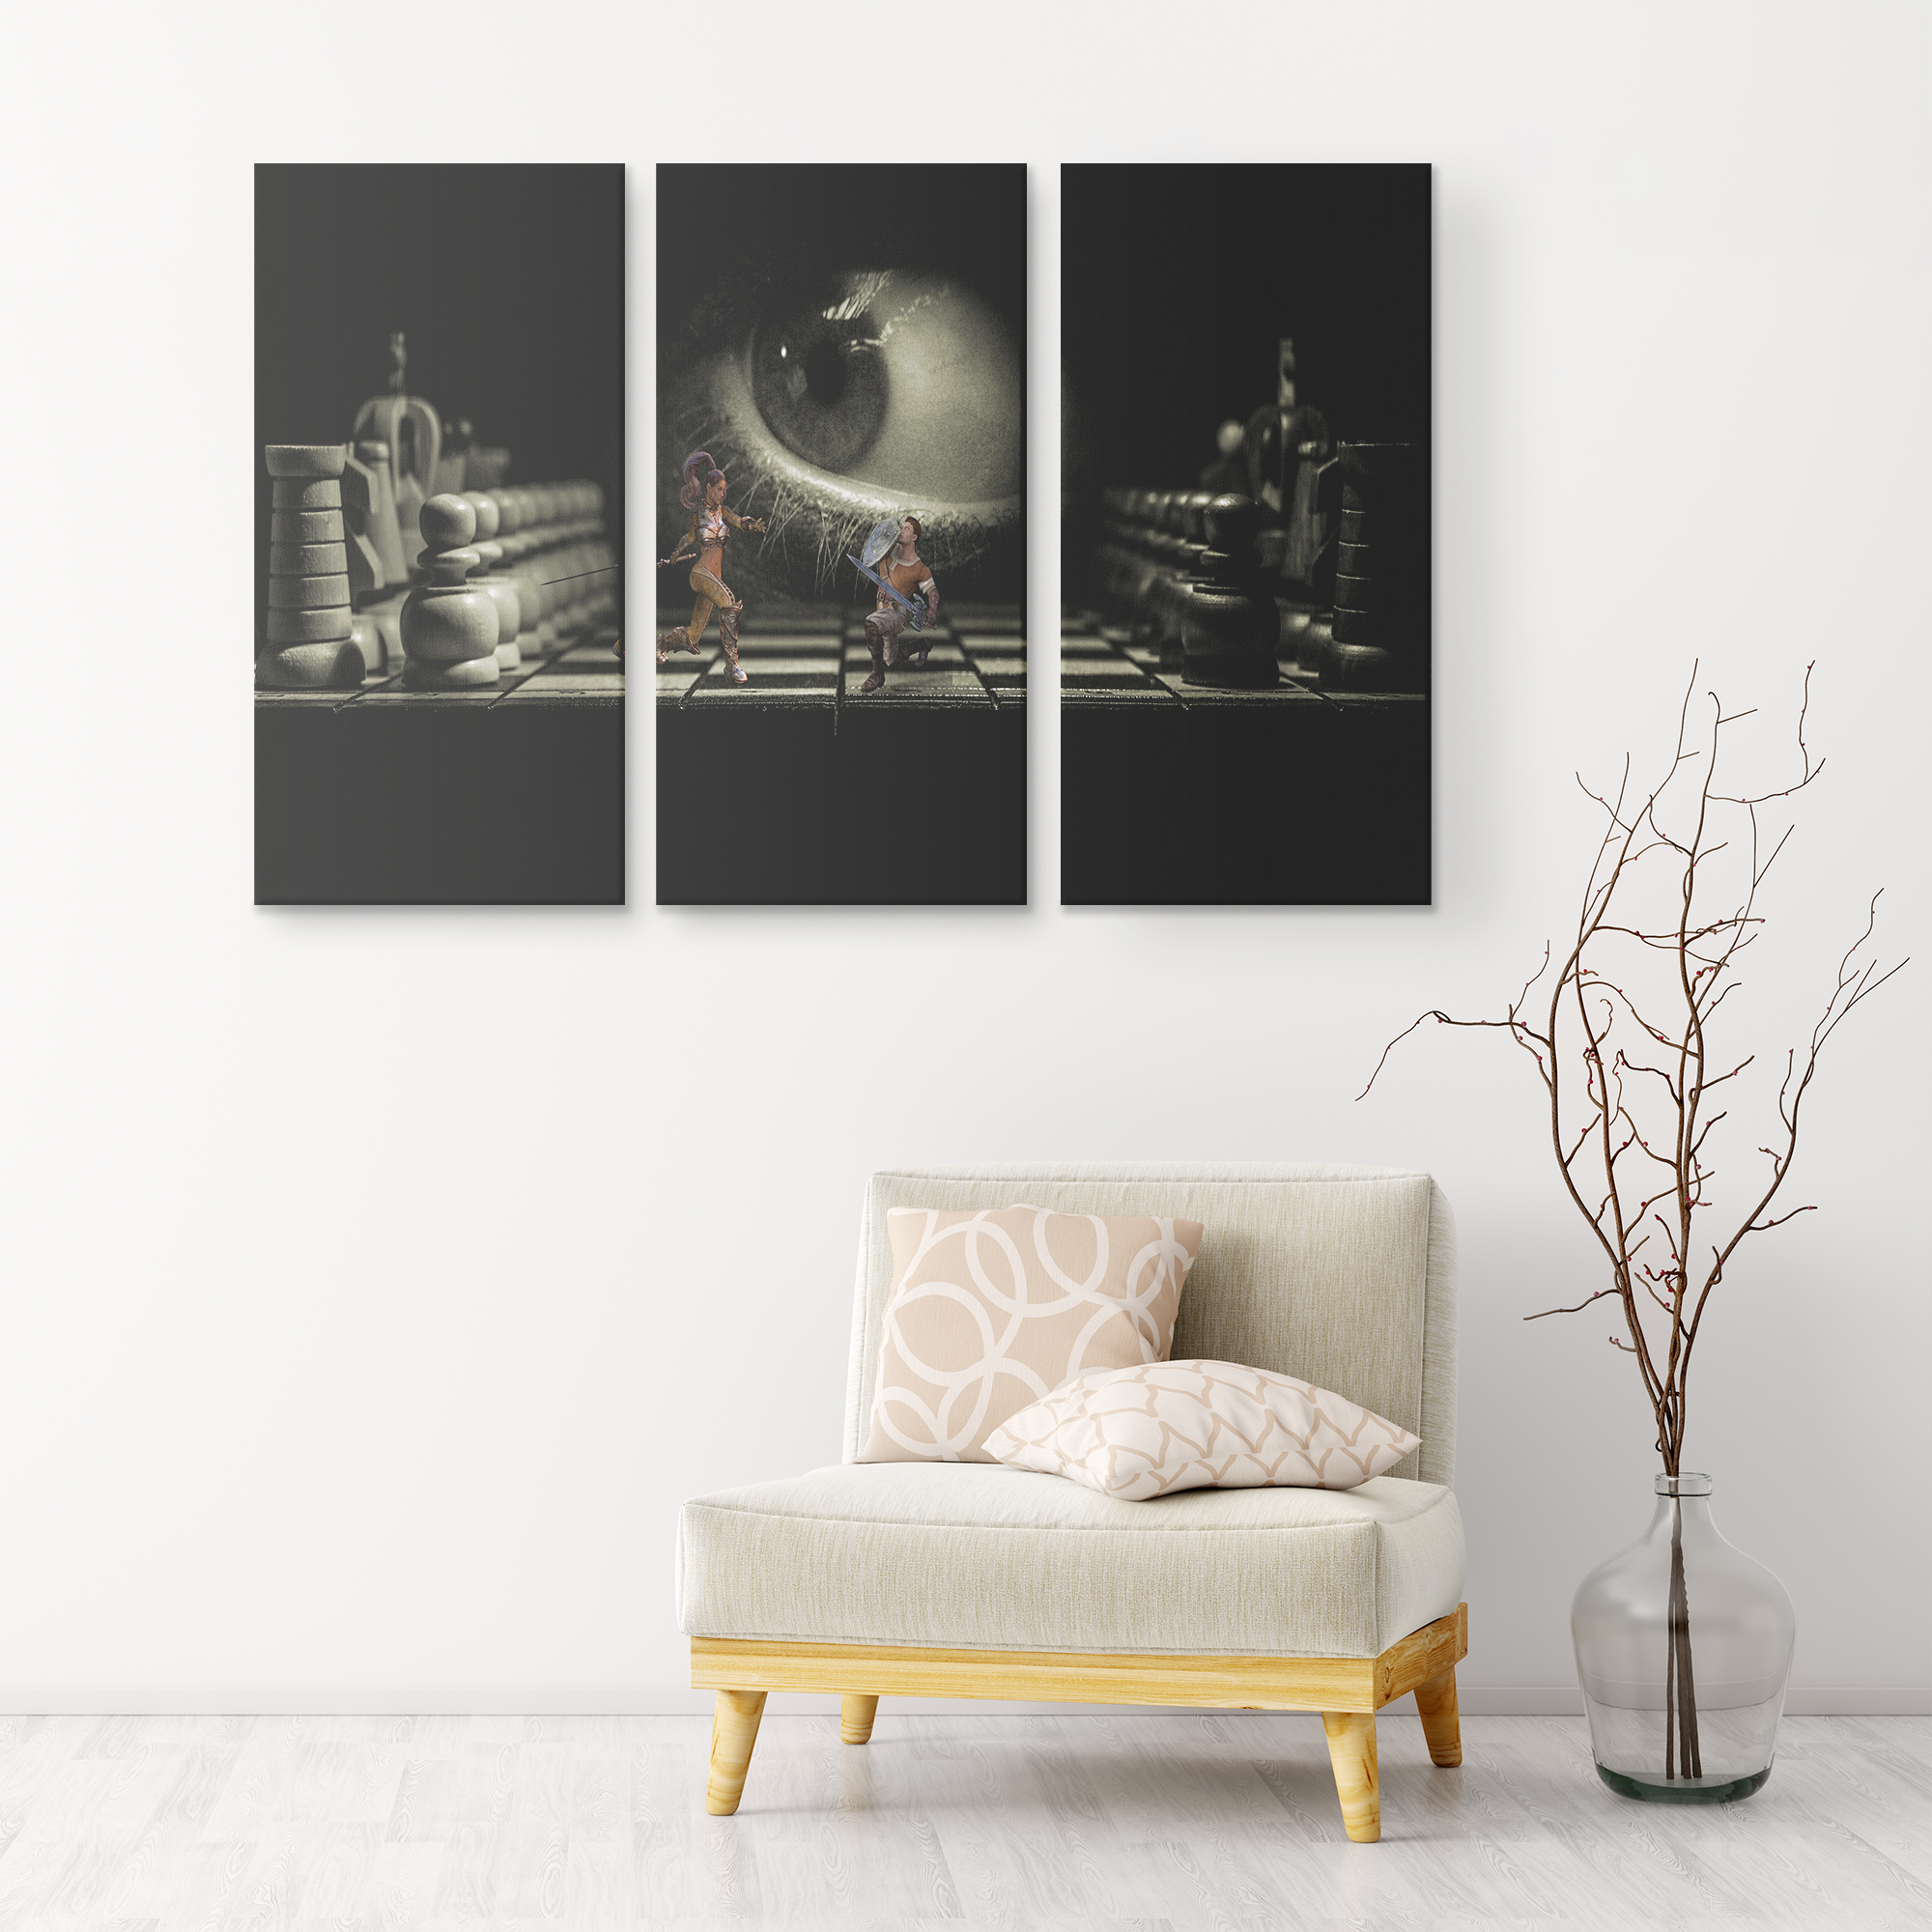 The battle of love and chess - 3 Piece Canvas wall art